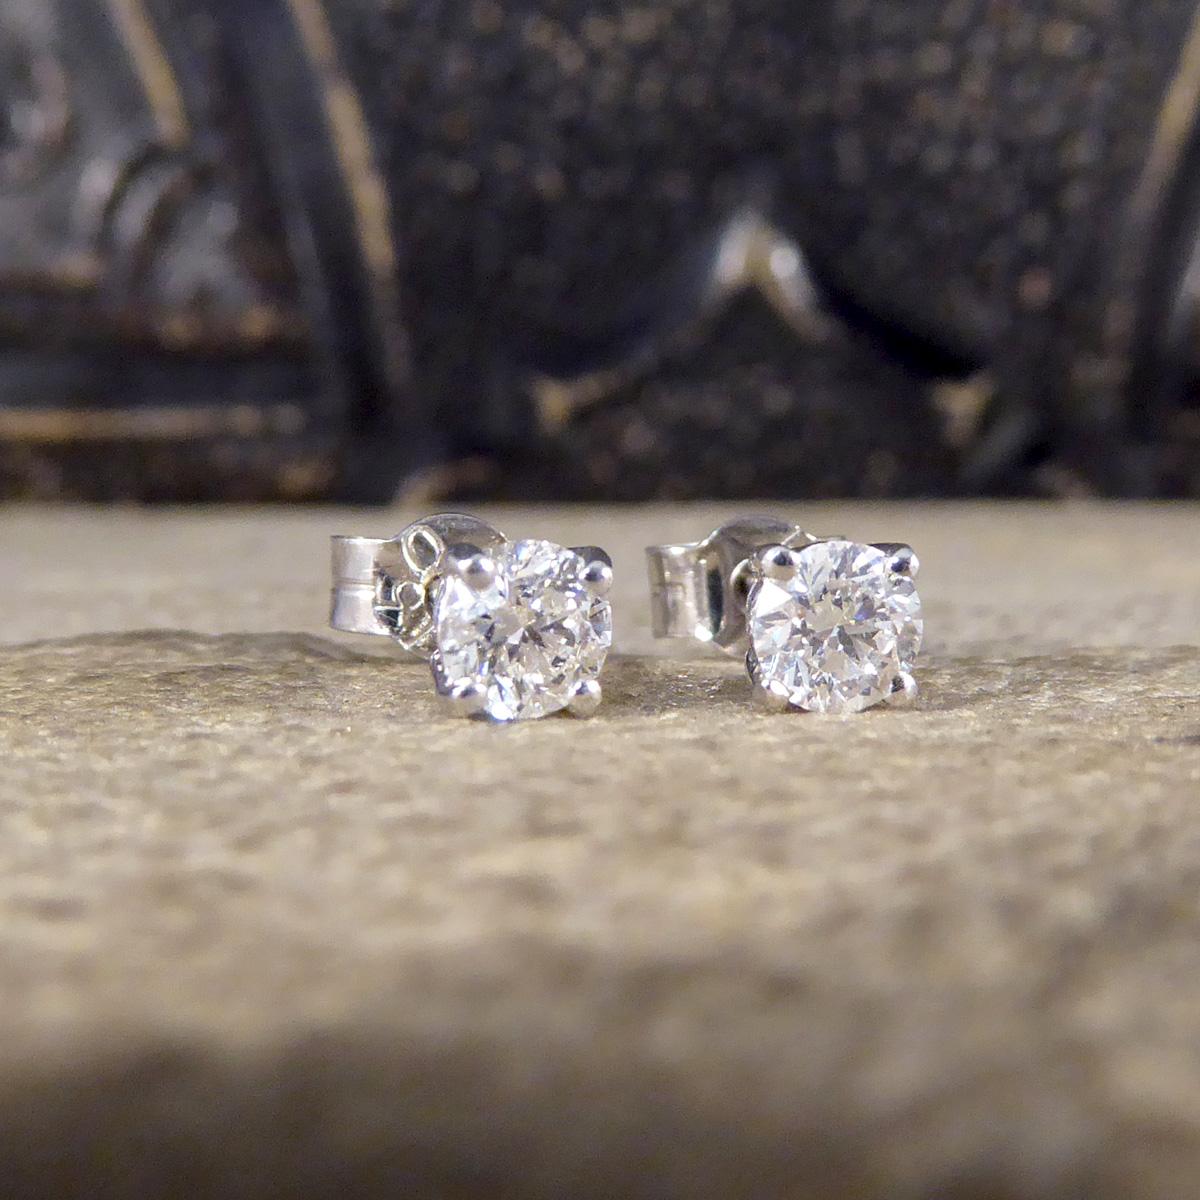 The perfect pair of stud earrings for everyday wear. Each stud is set with a Round Brilliant Cut Diamond, matching well in colour and clarity and weighing a total of 0.53ct. Each Diamond sits in a White Gold basket four claw setting, allowing lots